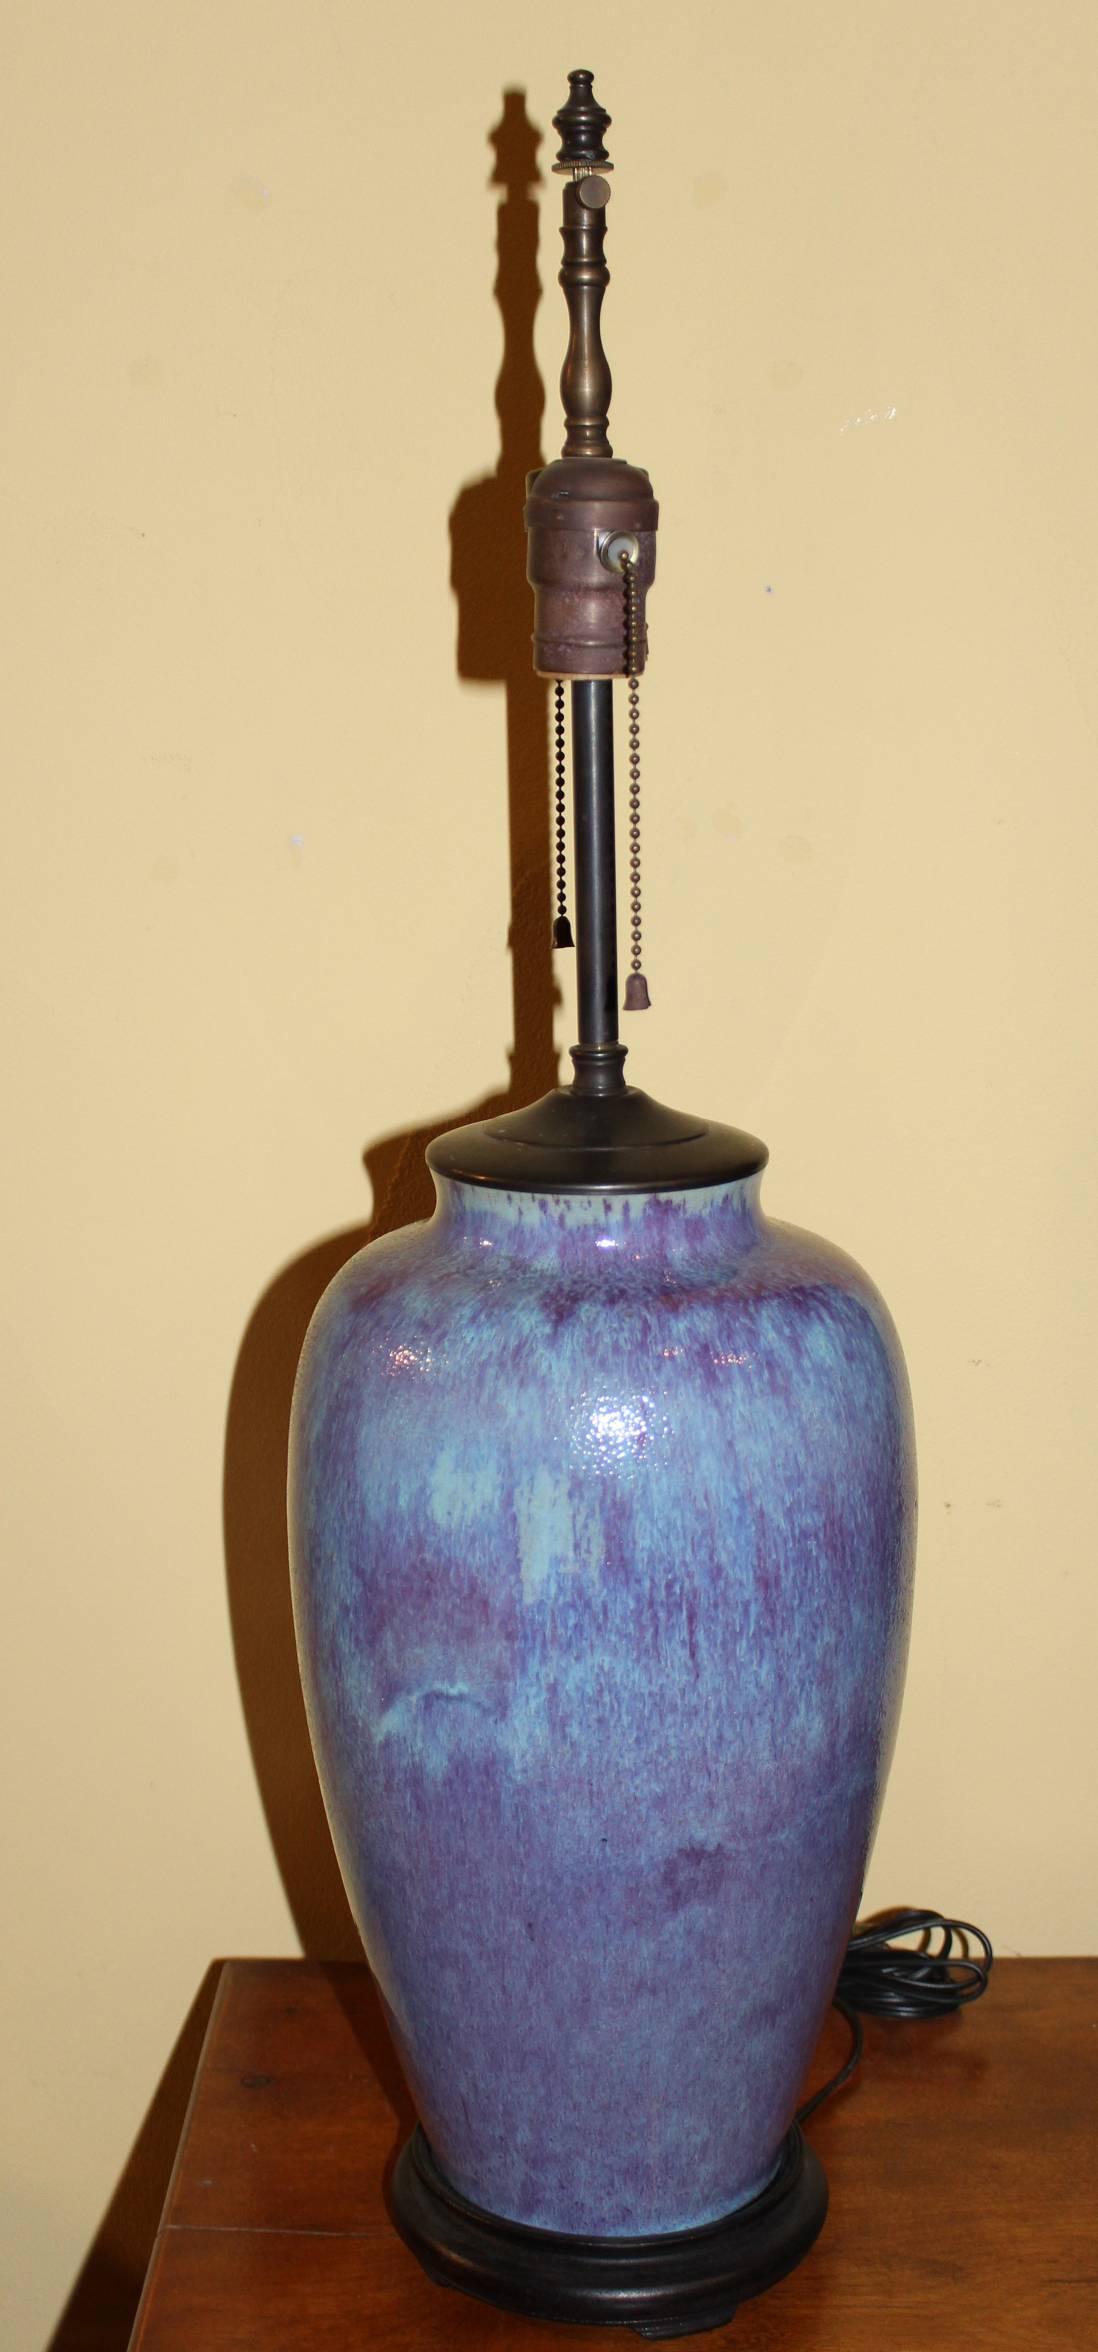 A Chinese flambe glazed porcelain vase in an elongated ovoid form, converted to a two light lamp in the 20th century, on an ebonized wooden base. The vase probably dates to the late 19th century. Good working condition.